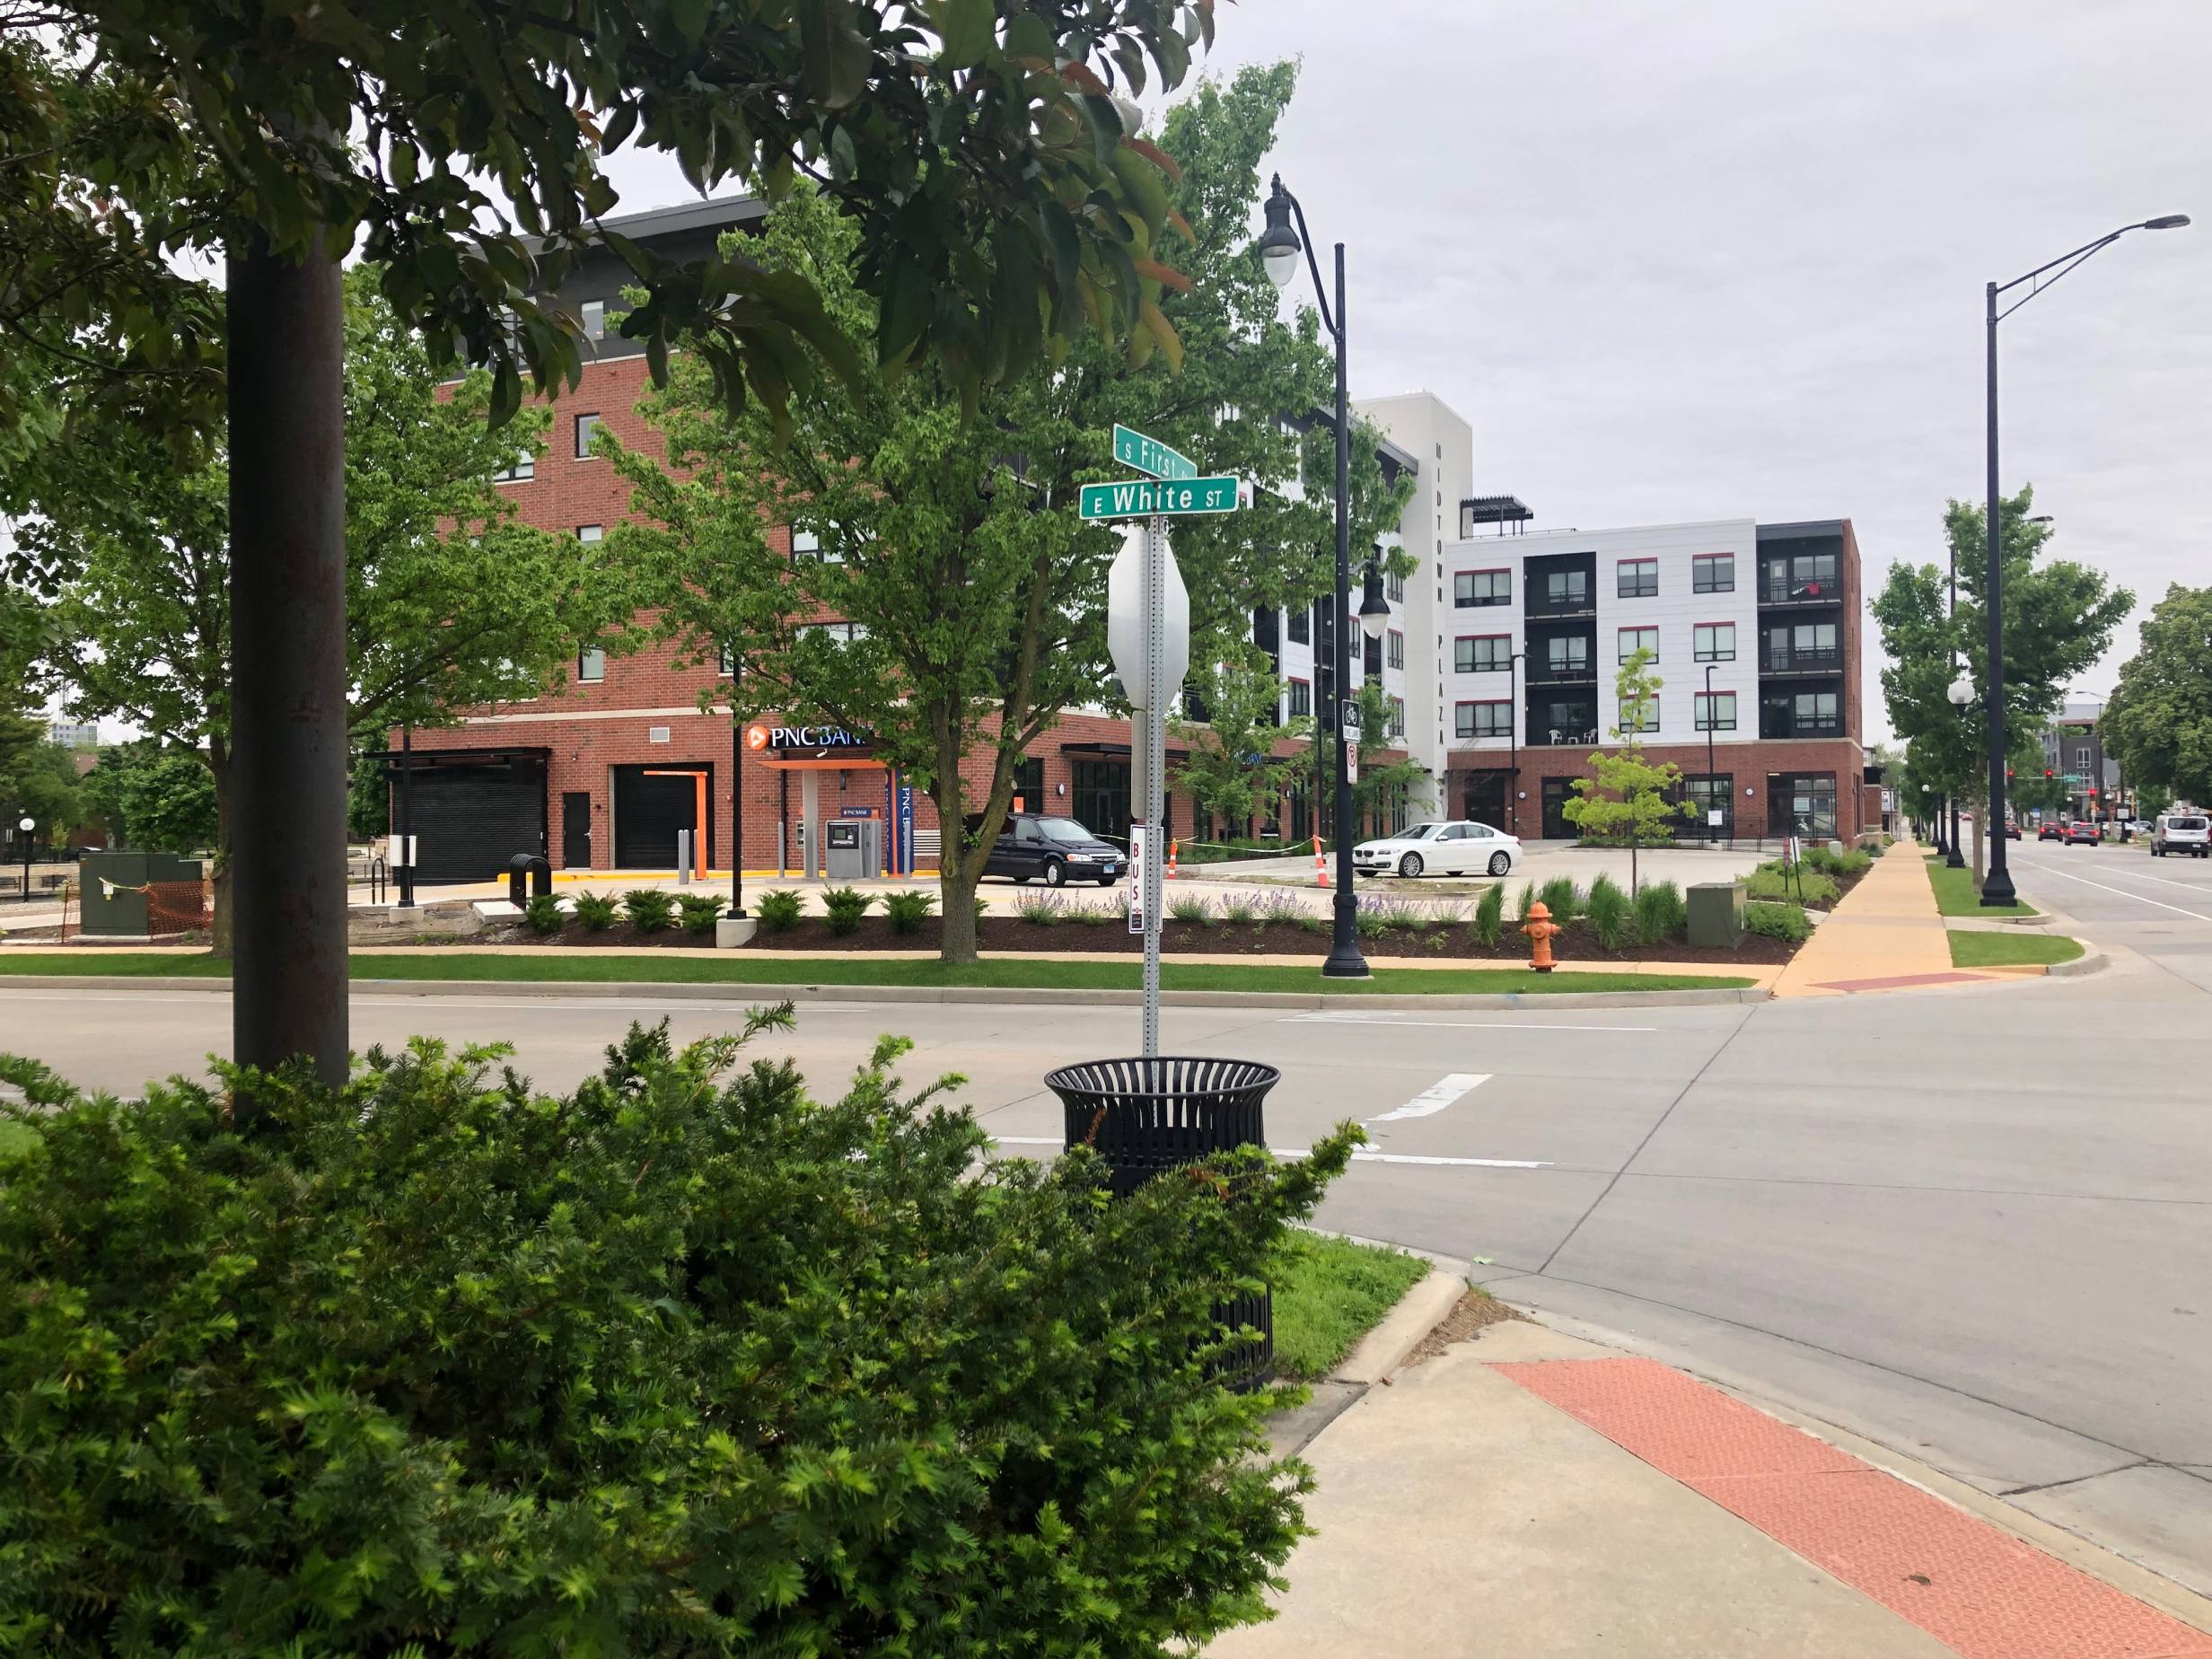 The growing importance of First Street